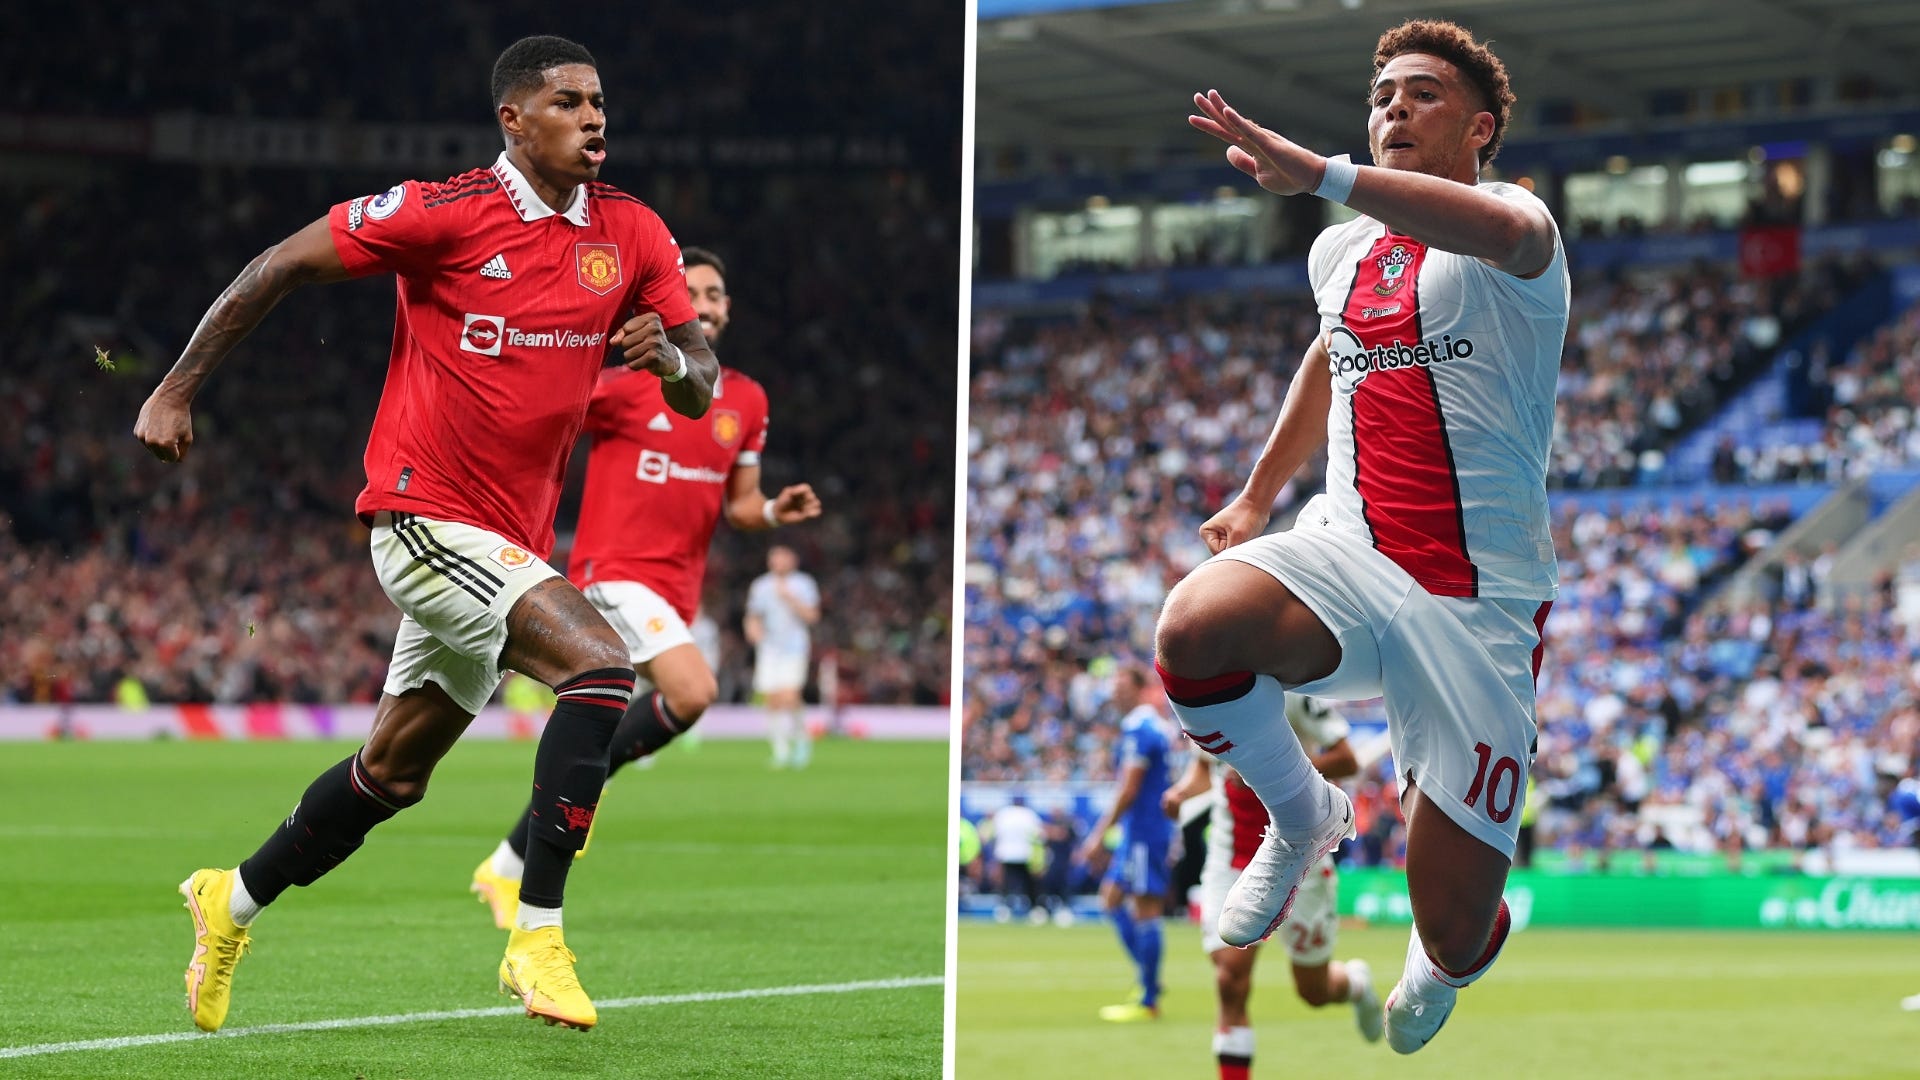 Southampton vs Man Utd Live stream, TV channel, kick-off time and how to watch Goal United Arab Emirates